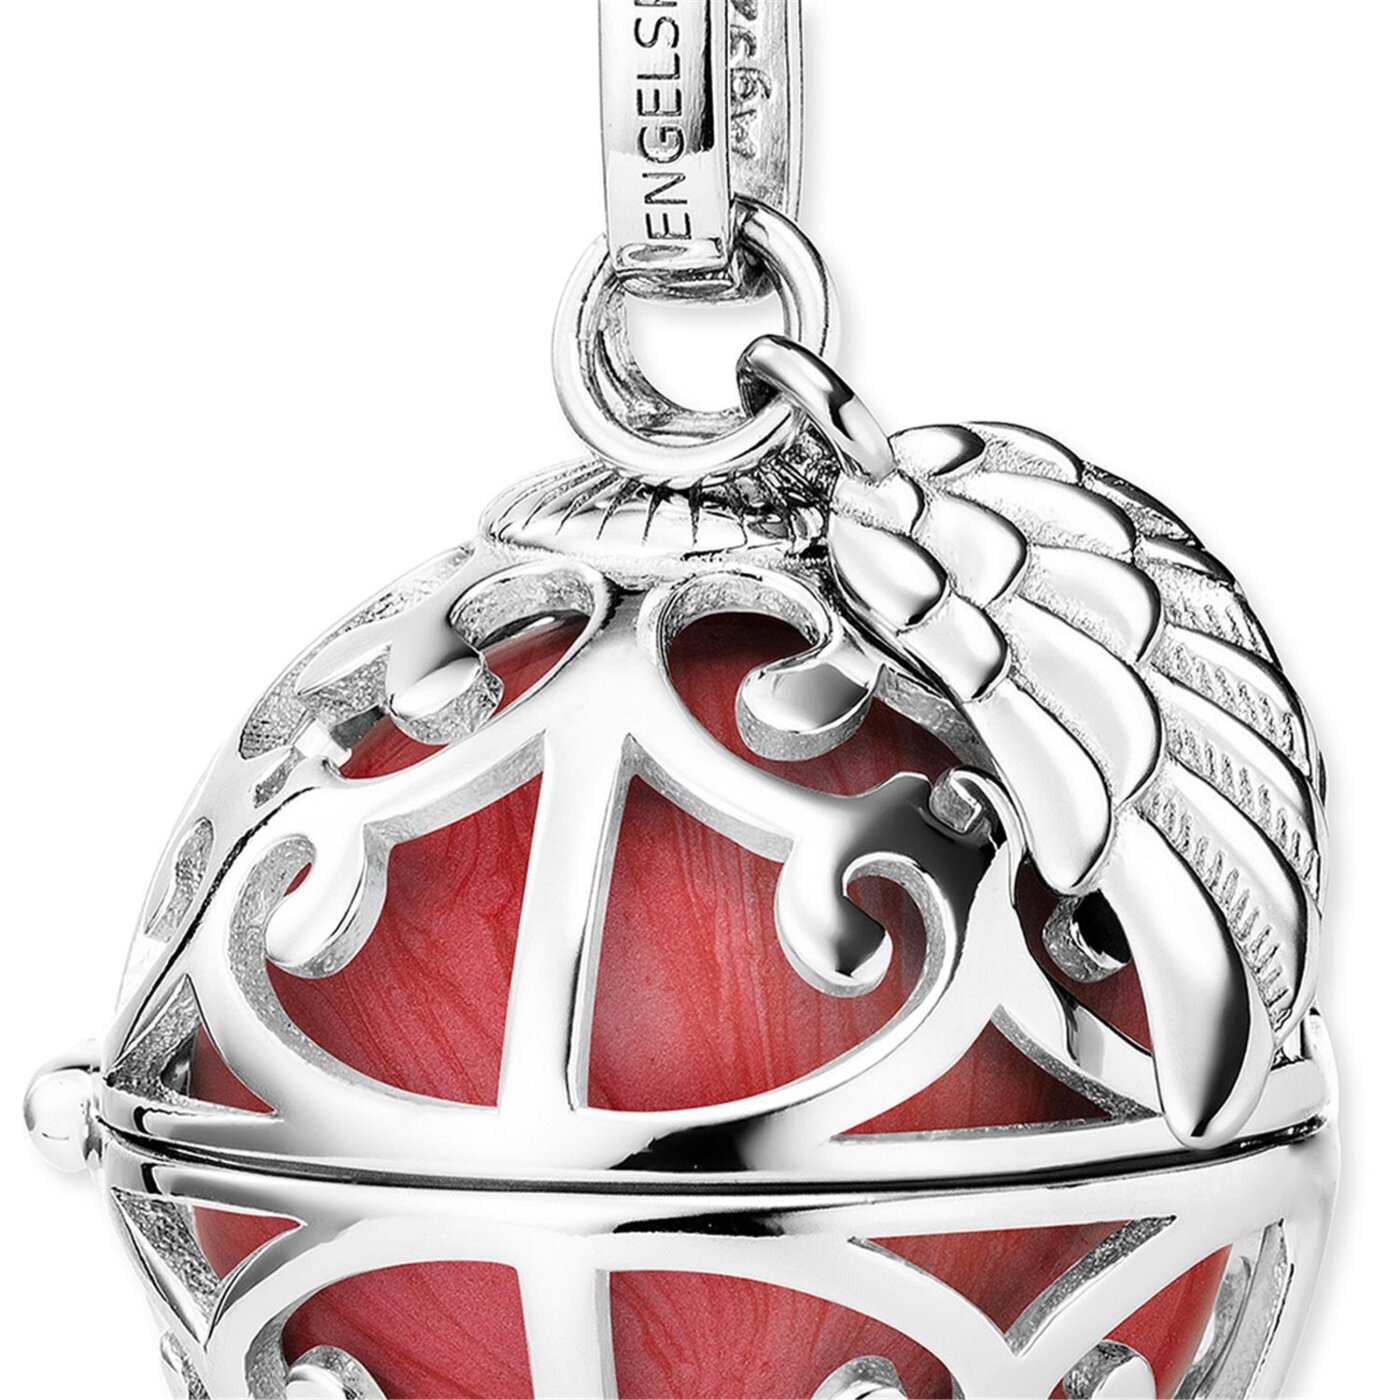 Angel caller sound ball pendant S ⌀16.5mm 925 silver mother-of-pearl red